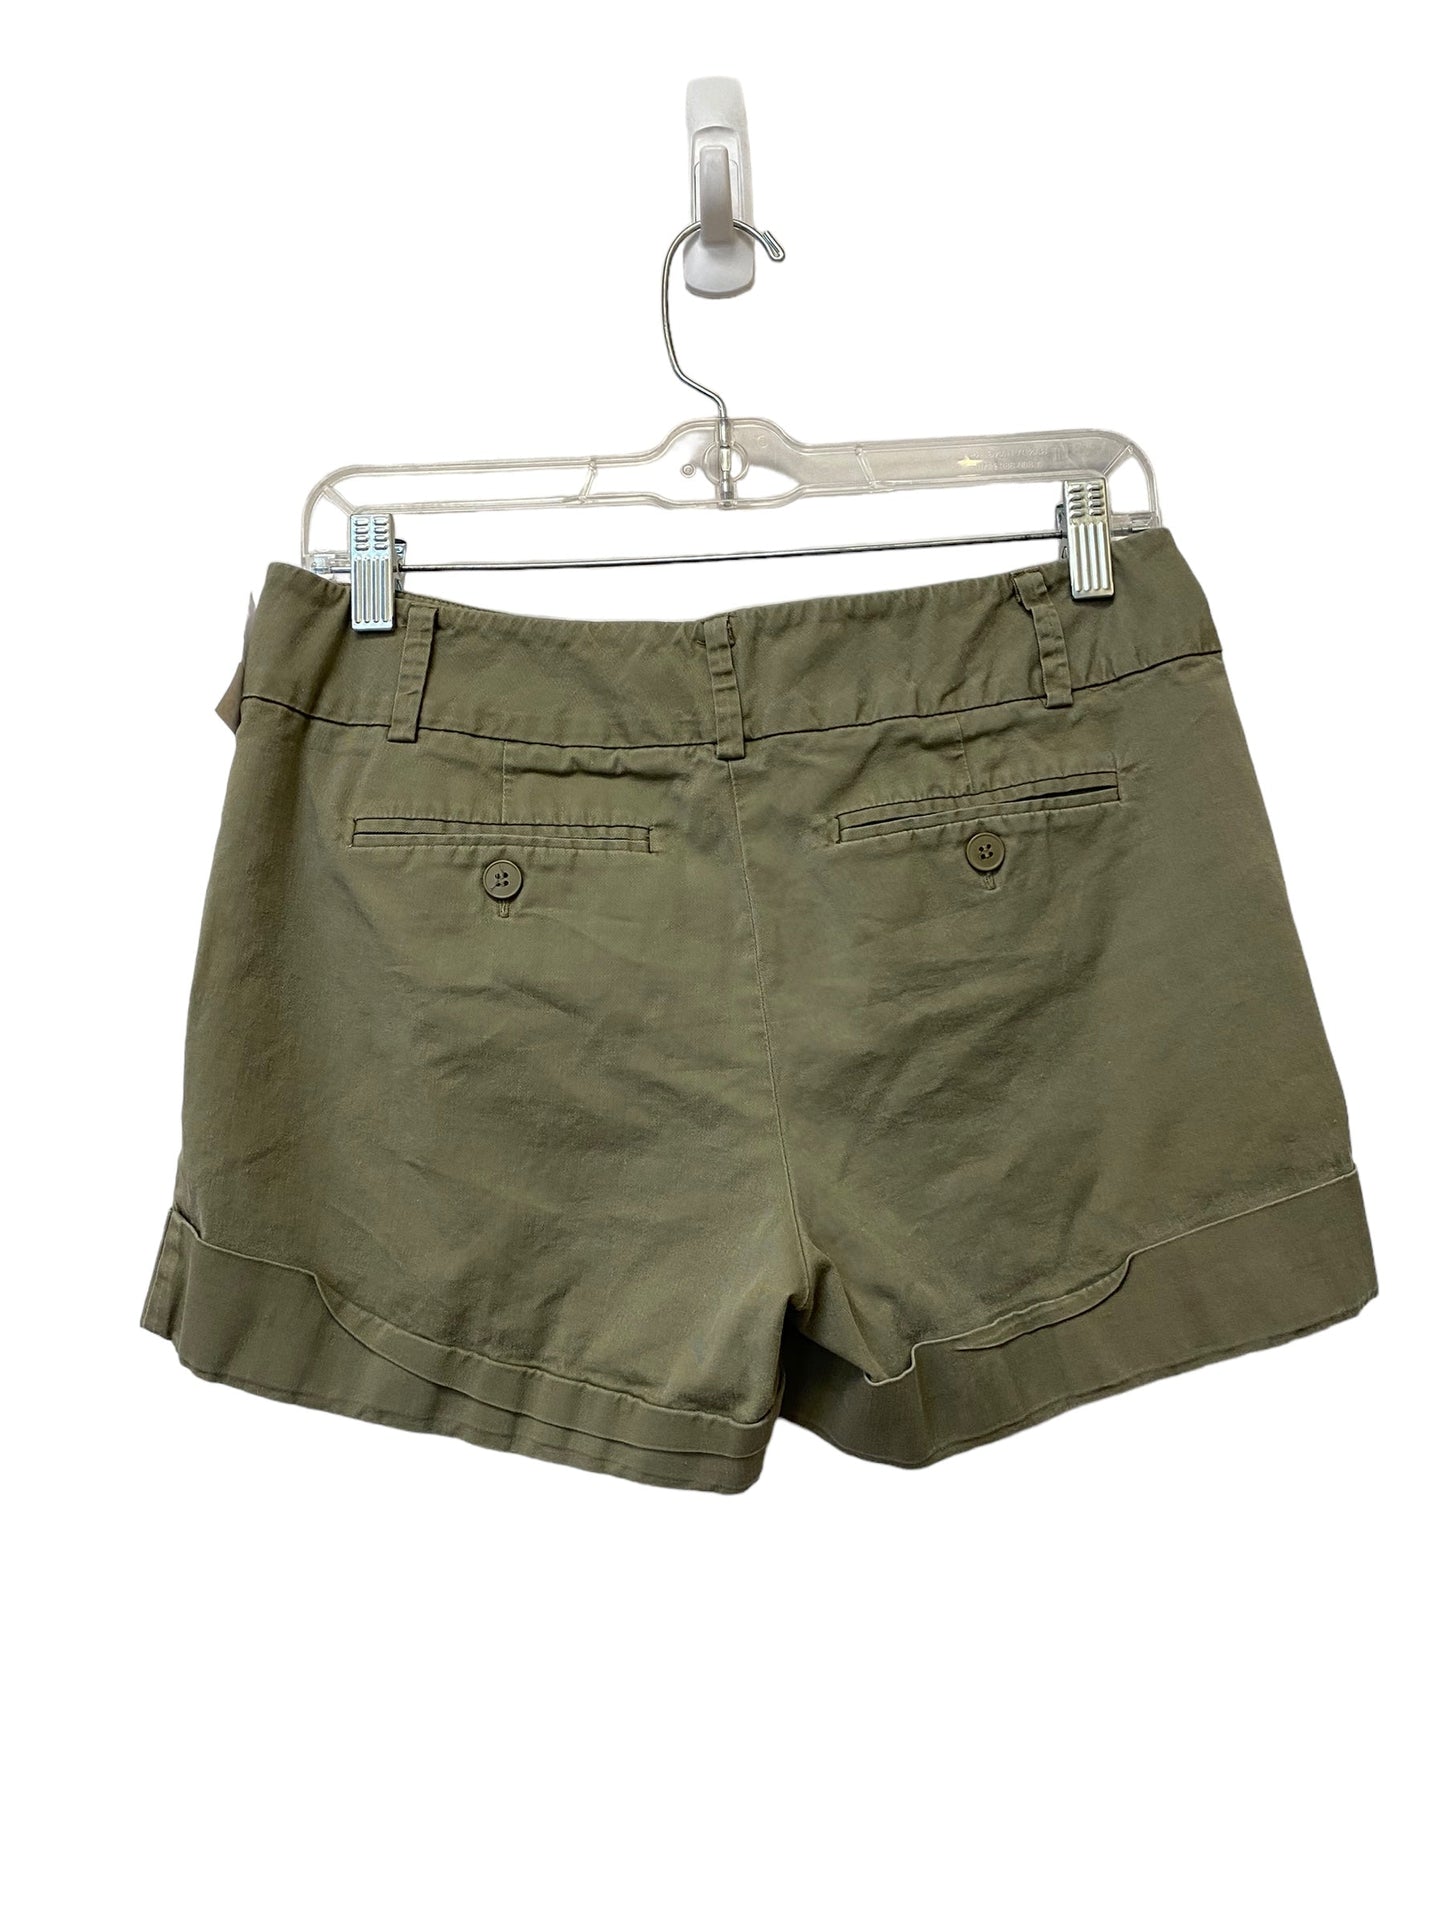 Green Shorts New York And Co, Size 6